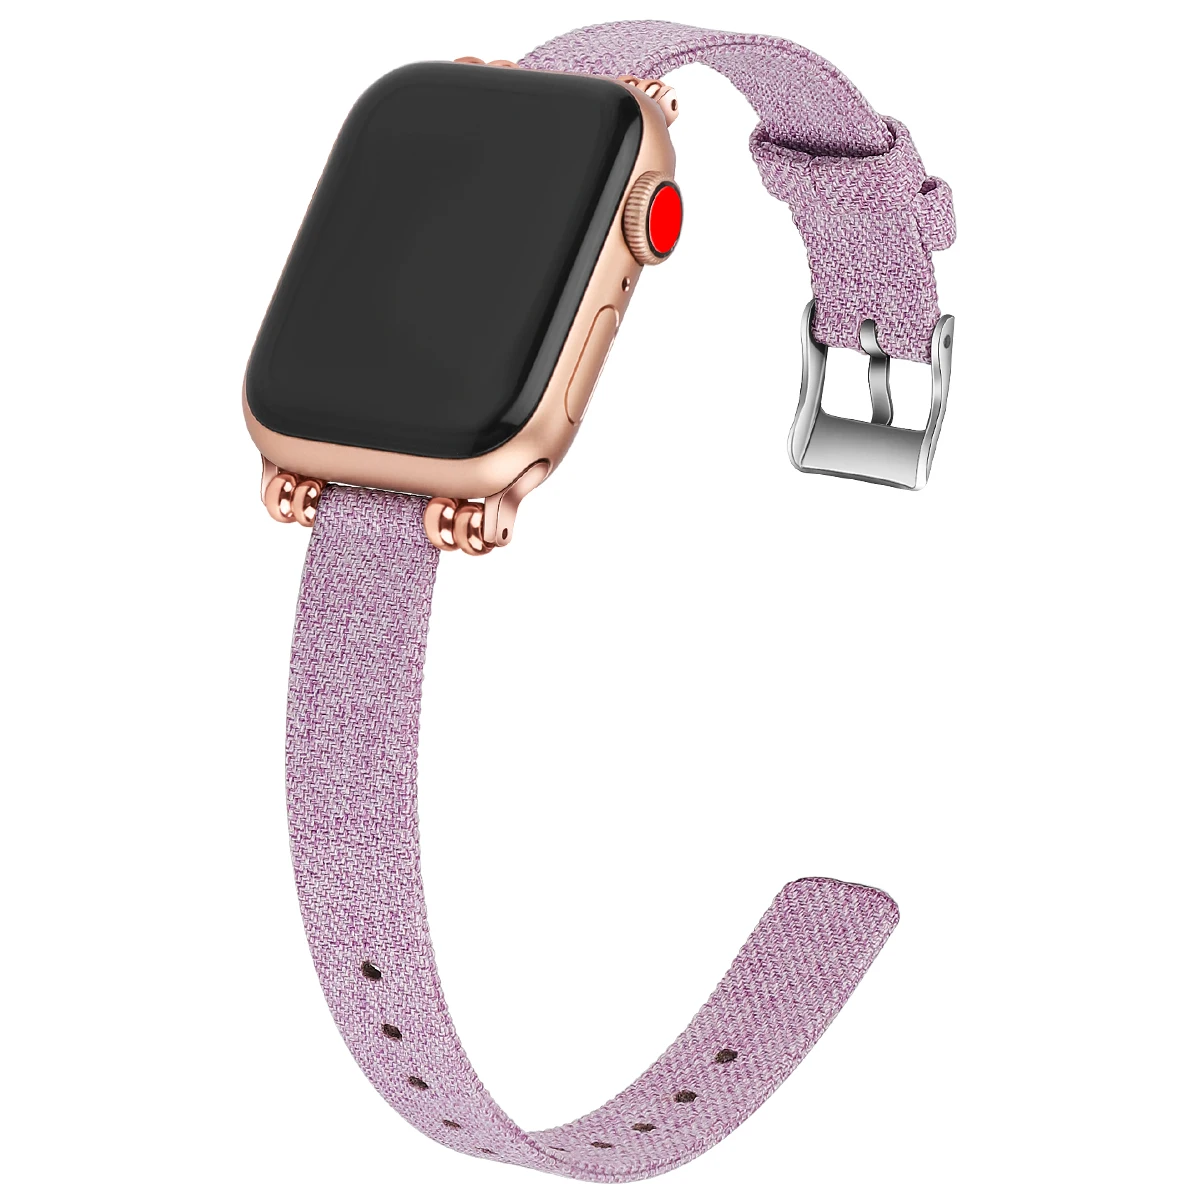 

Slim Nylon Band For Apple Watch Strap 44mm 40mm Thin Canvas Bracelet iWatch 6 SE 5 4 Watchbands For Applewatch 3 42mm 38mm Bands